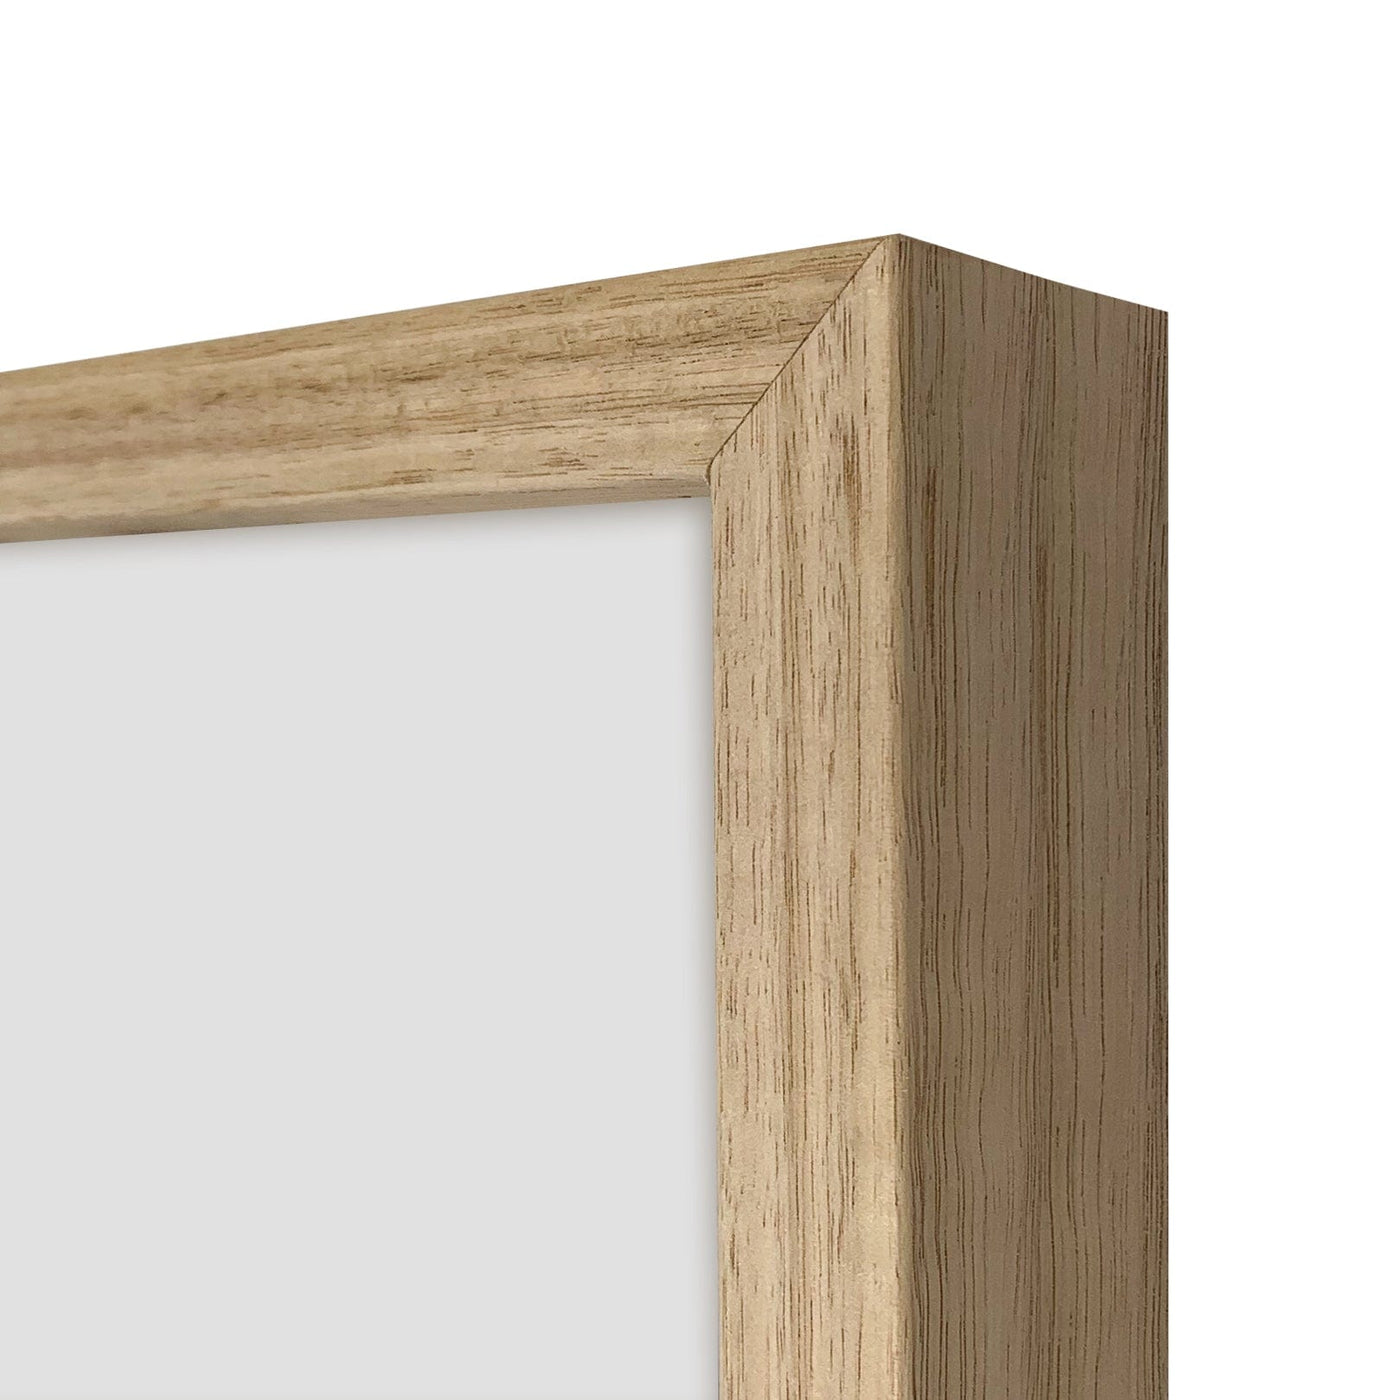 Gallery Box Victorian Ash Natural Oak Poster Frame from our Australian Made Picture Frames collection by Profile Products Australia